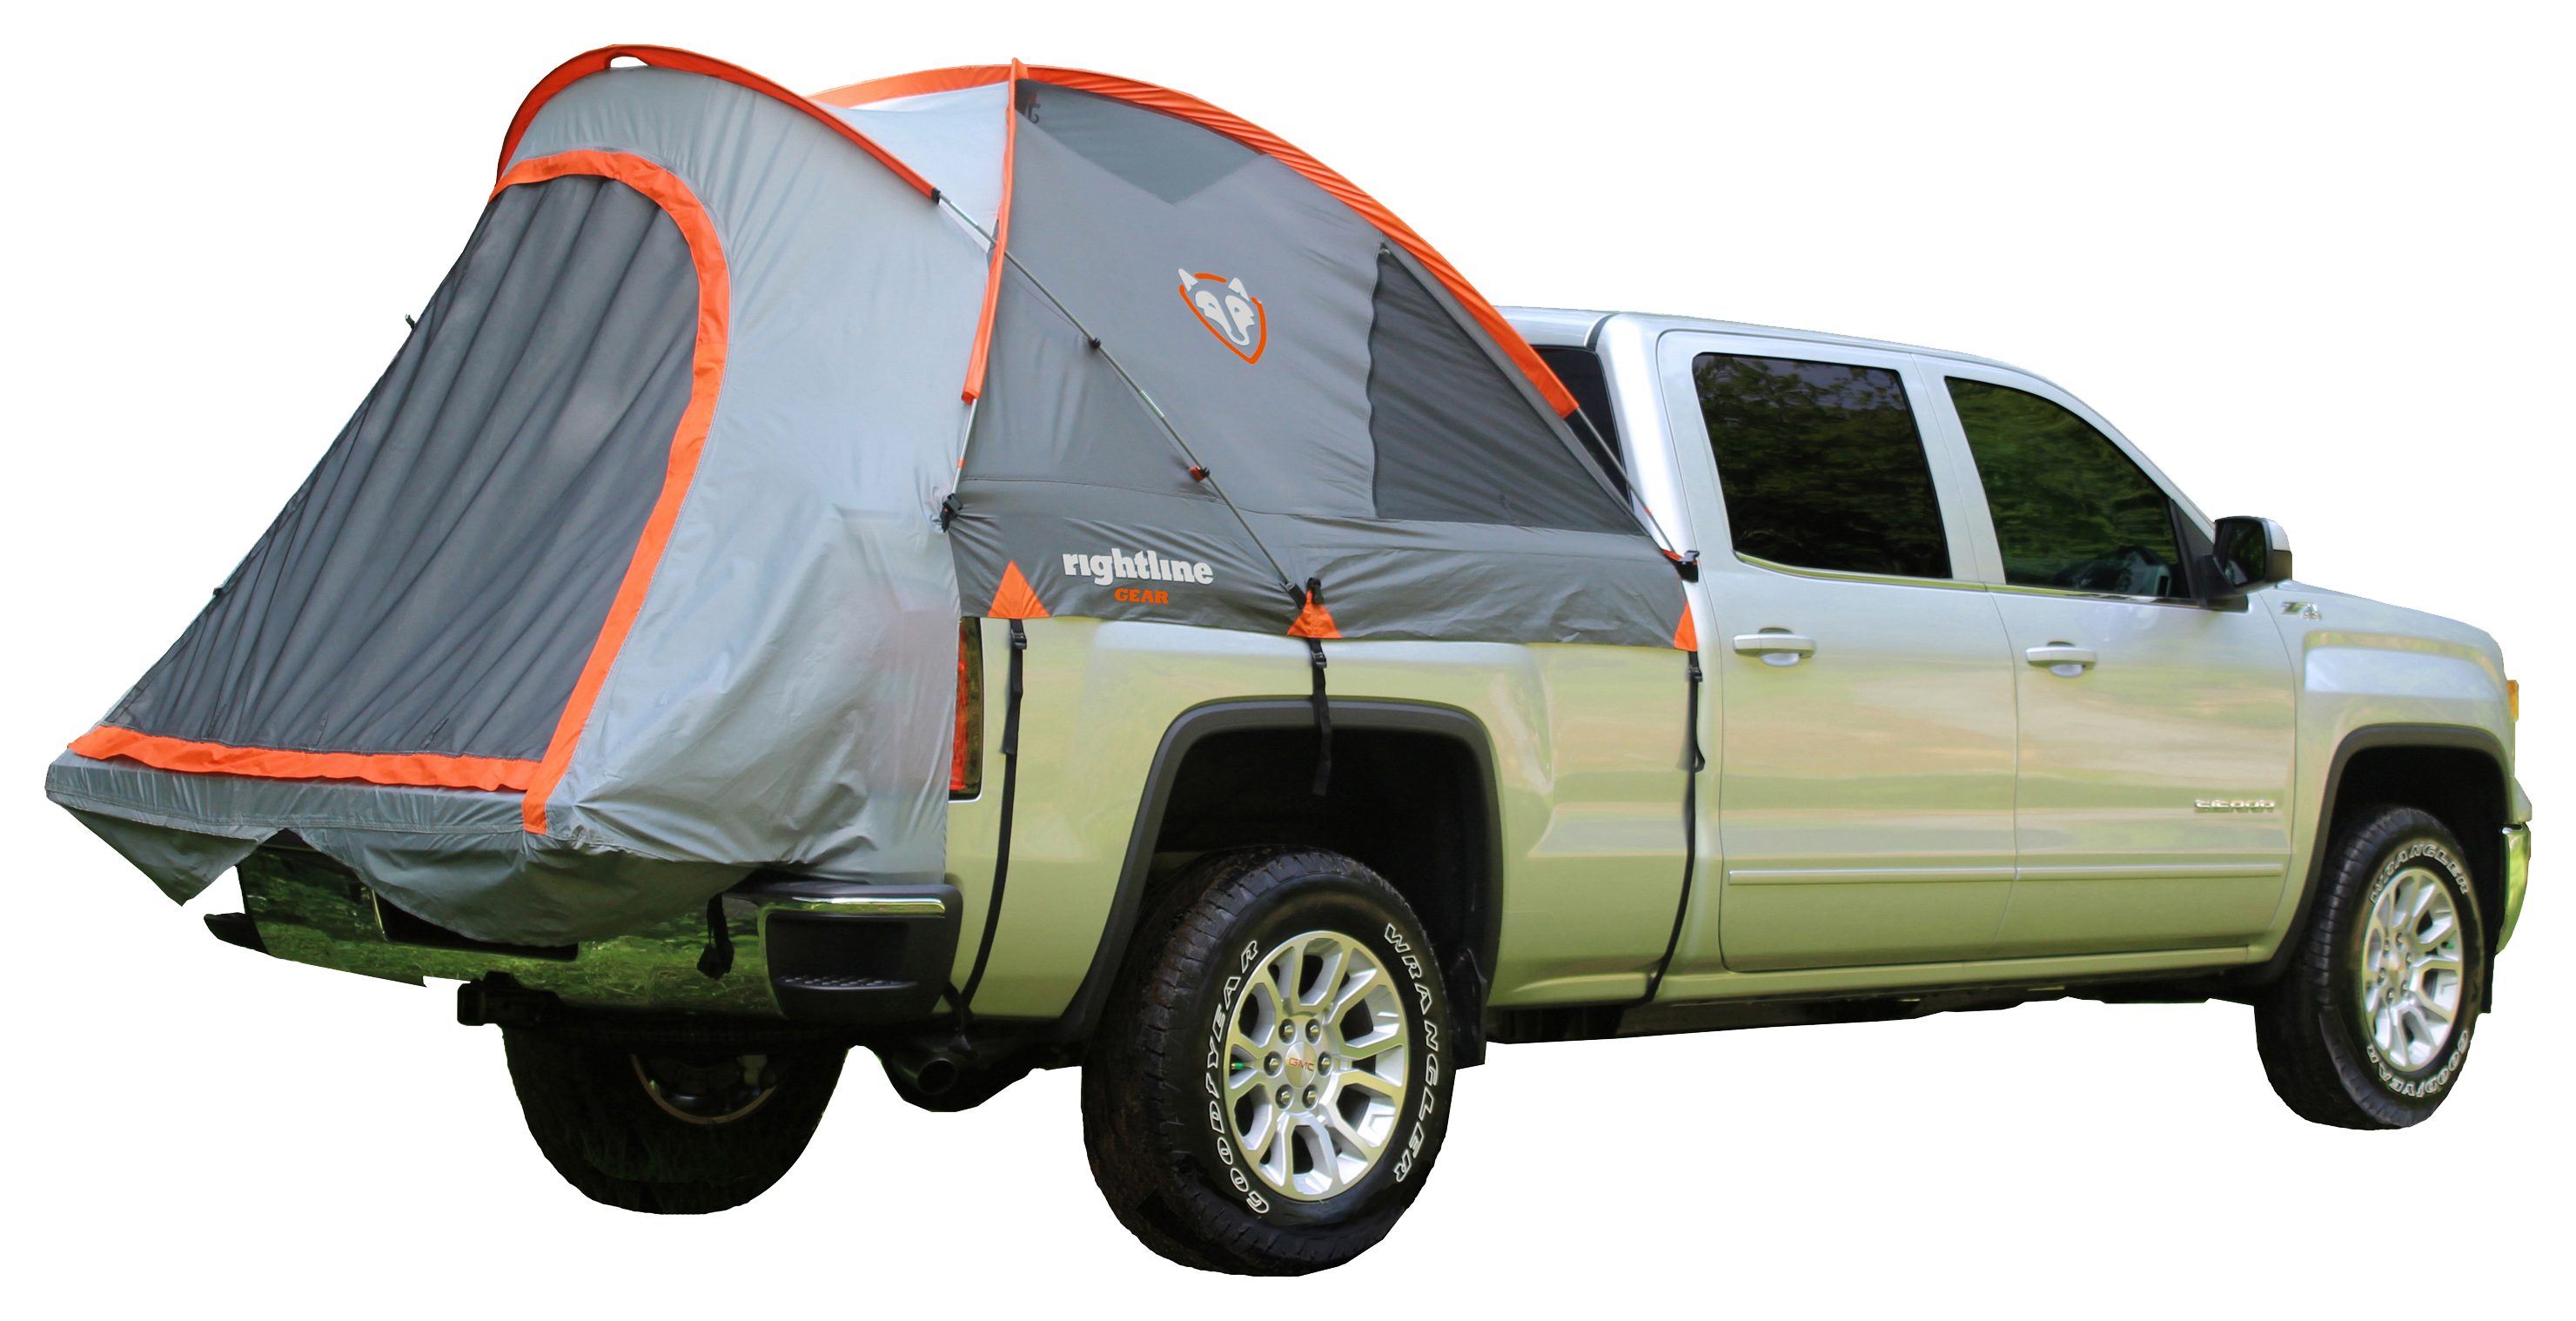 Rightline Gear 2-Person Truck Tent - 6.5' Full-Size Standard Bed